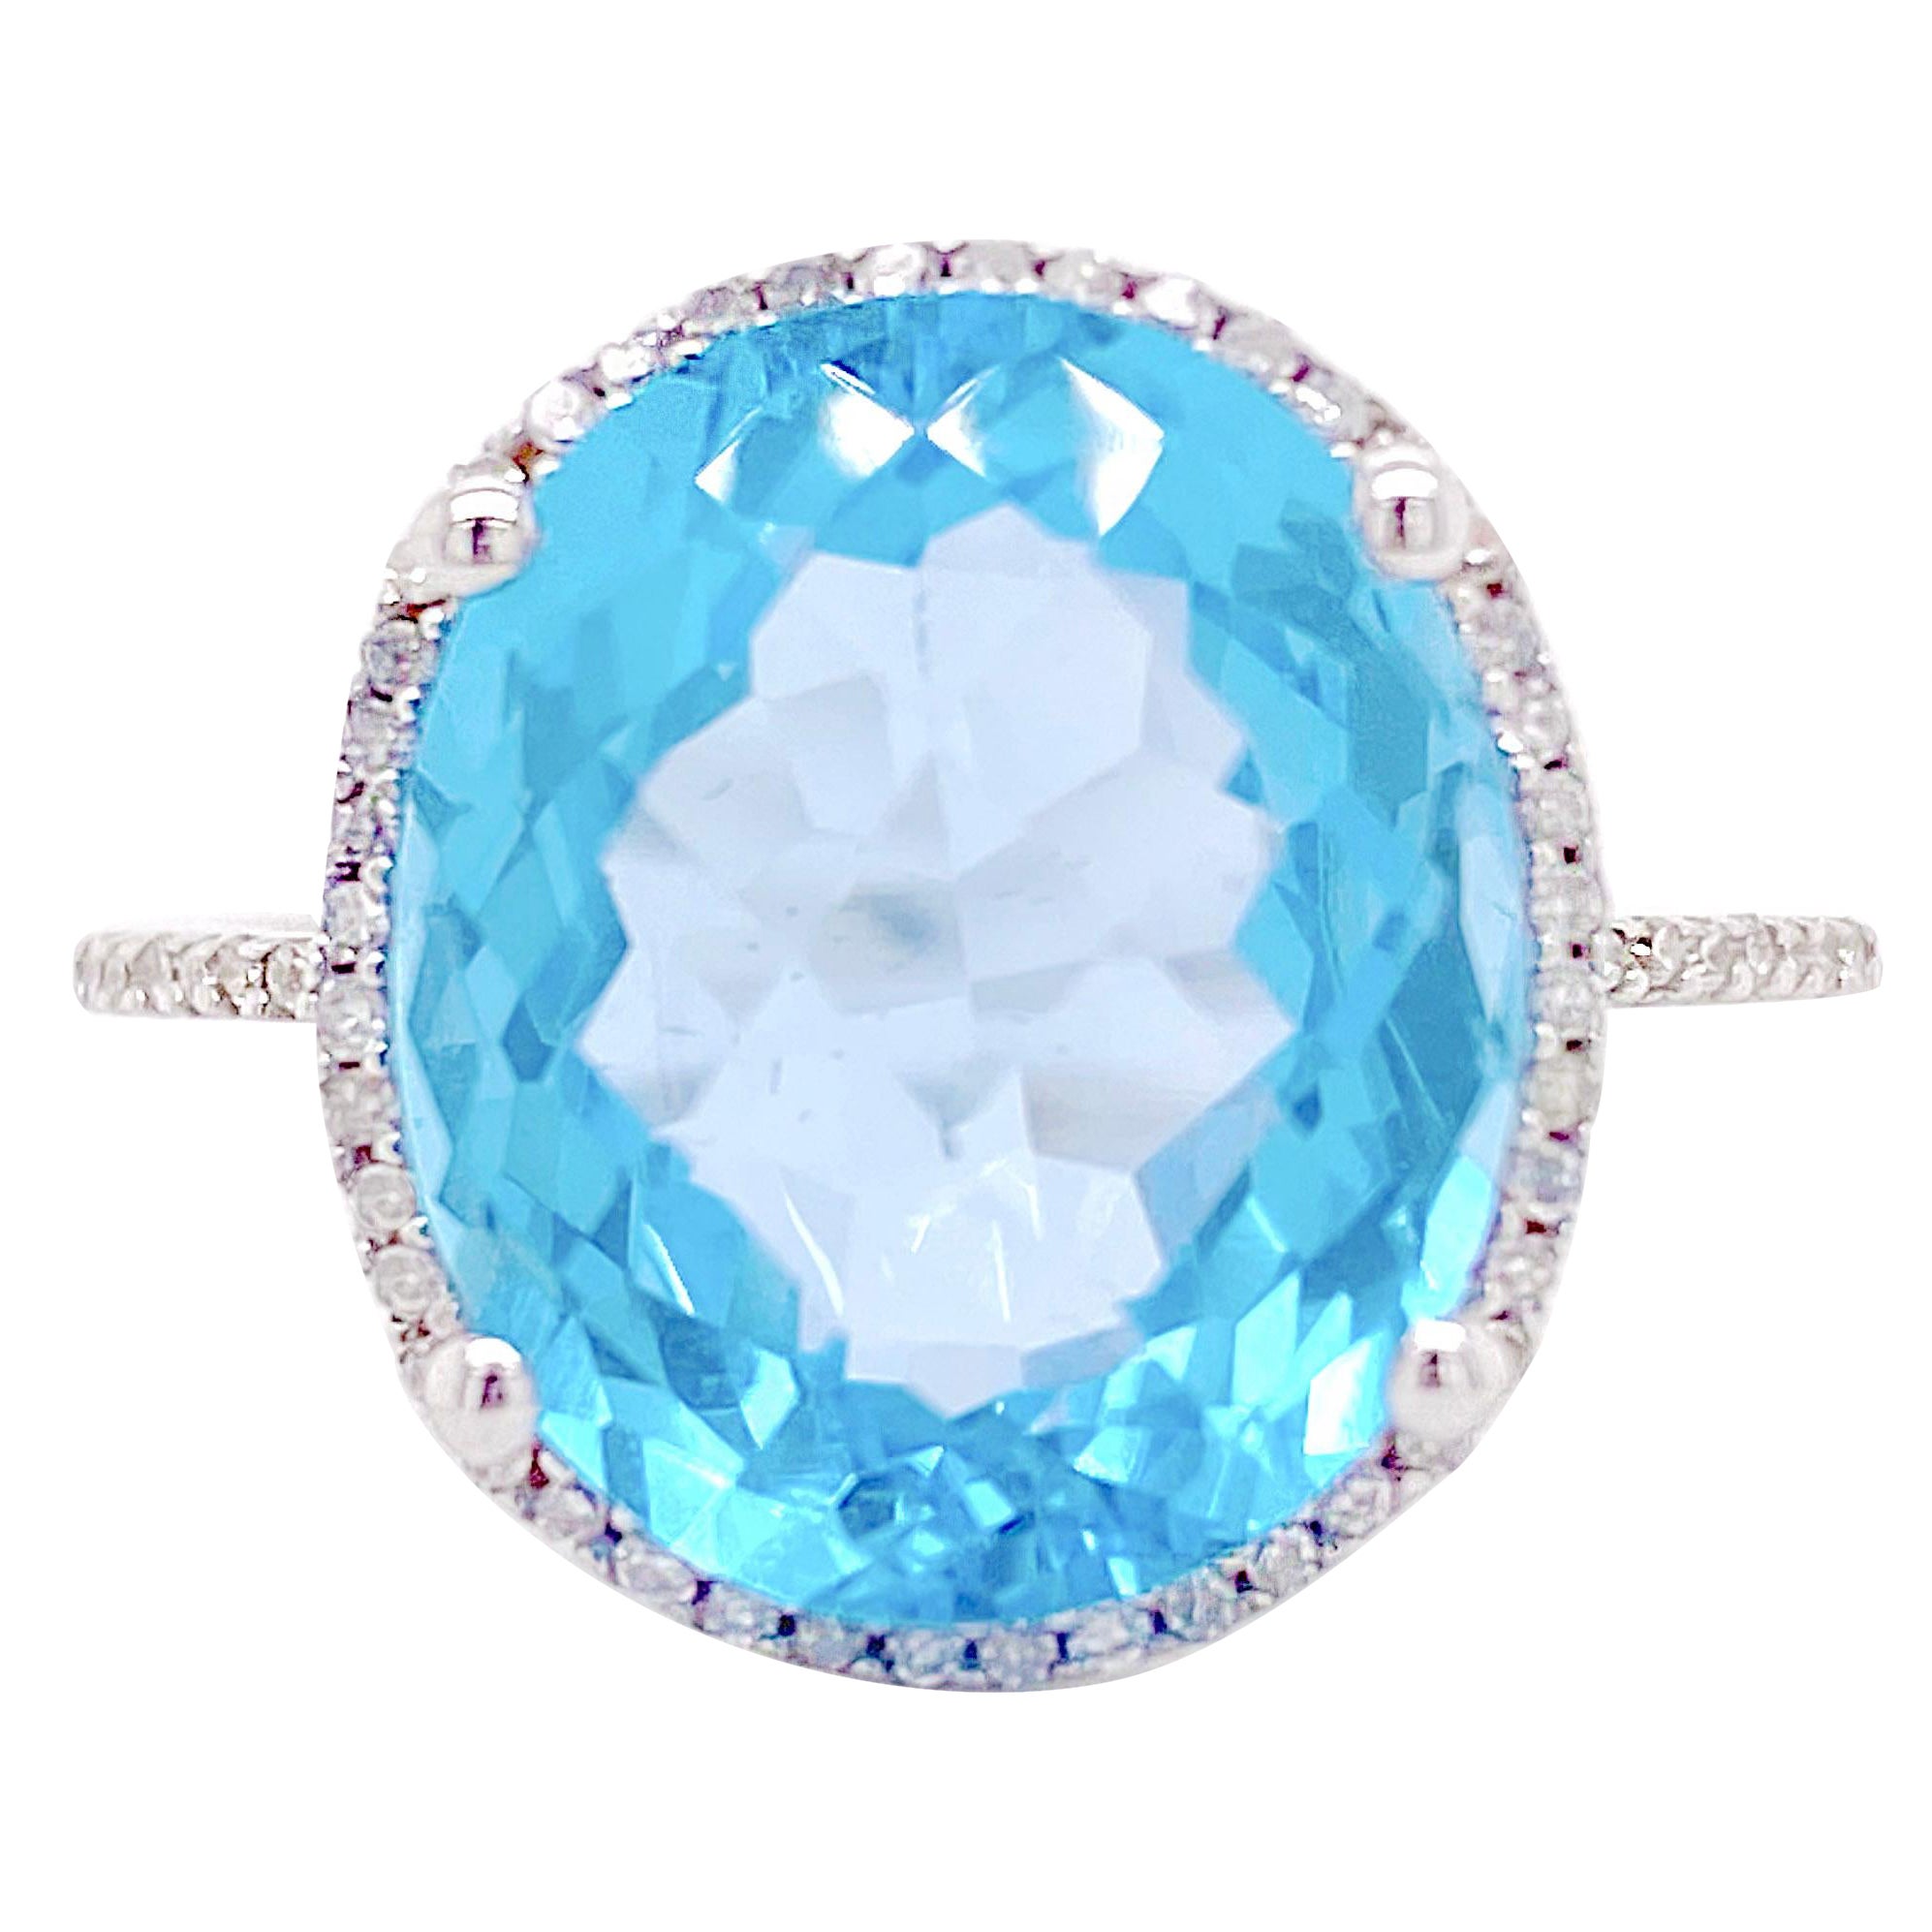 Blue Topaz and Diamond Halo Ring, Oval Blue Topaz, White Gold and Diamond Prongs